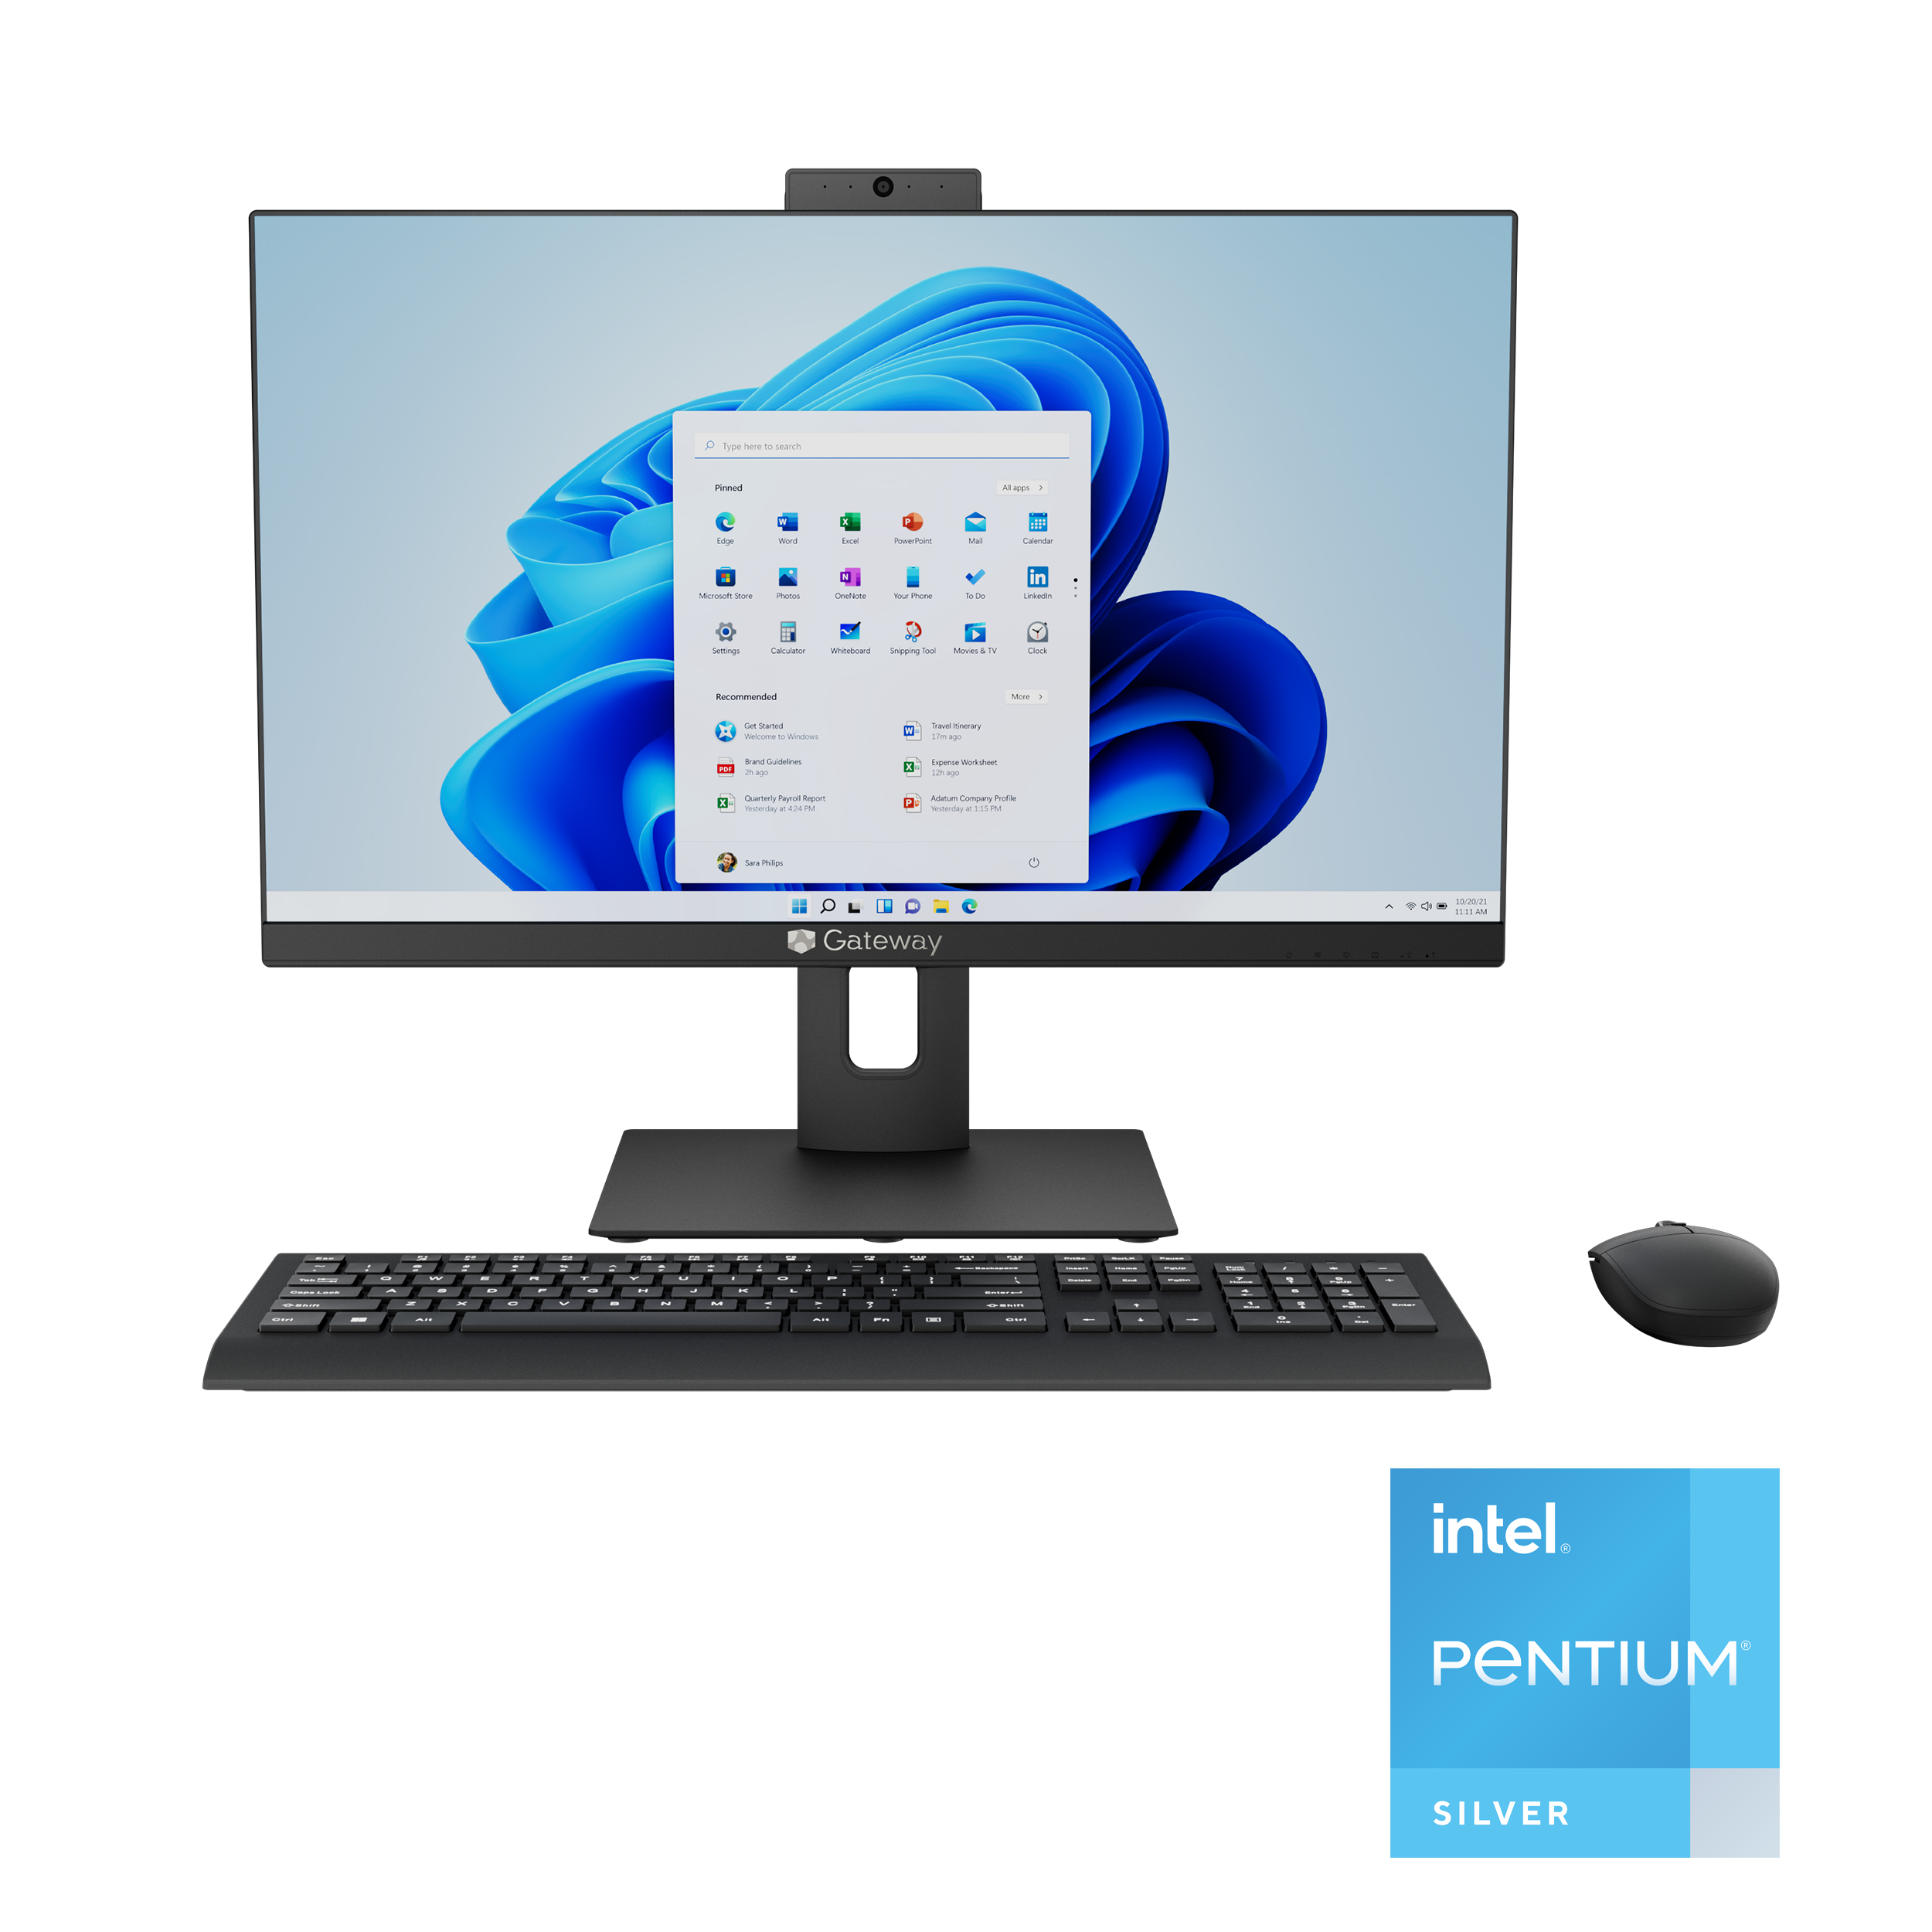 Gateway 23.8" All-in-one Desktop, Fully Adjustable Stand, FHD, Intel Pentium J5040, 4GB RAM, 128GB SSD, 2MP Camera, Windows 11, Microsoft 365 Personal 1-Year Included, Mouse & Keyboard Included, Black - image 1 of 11